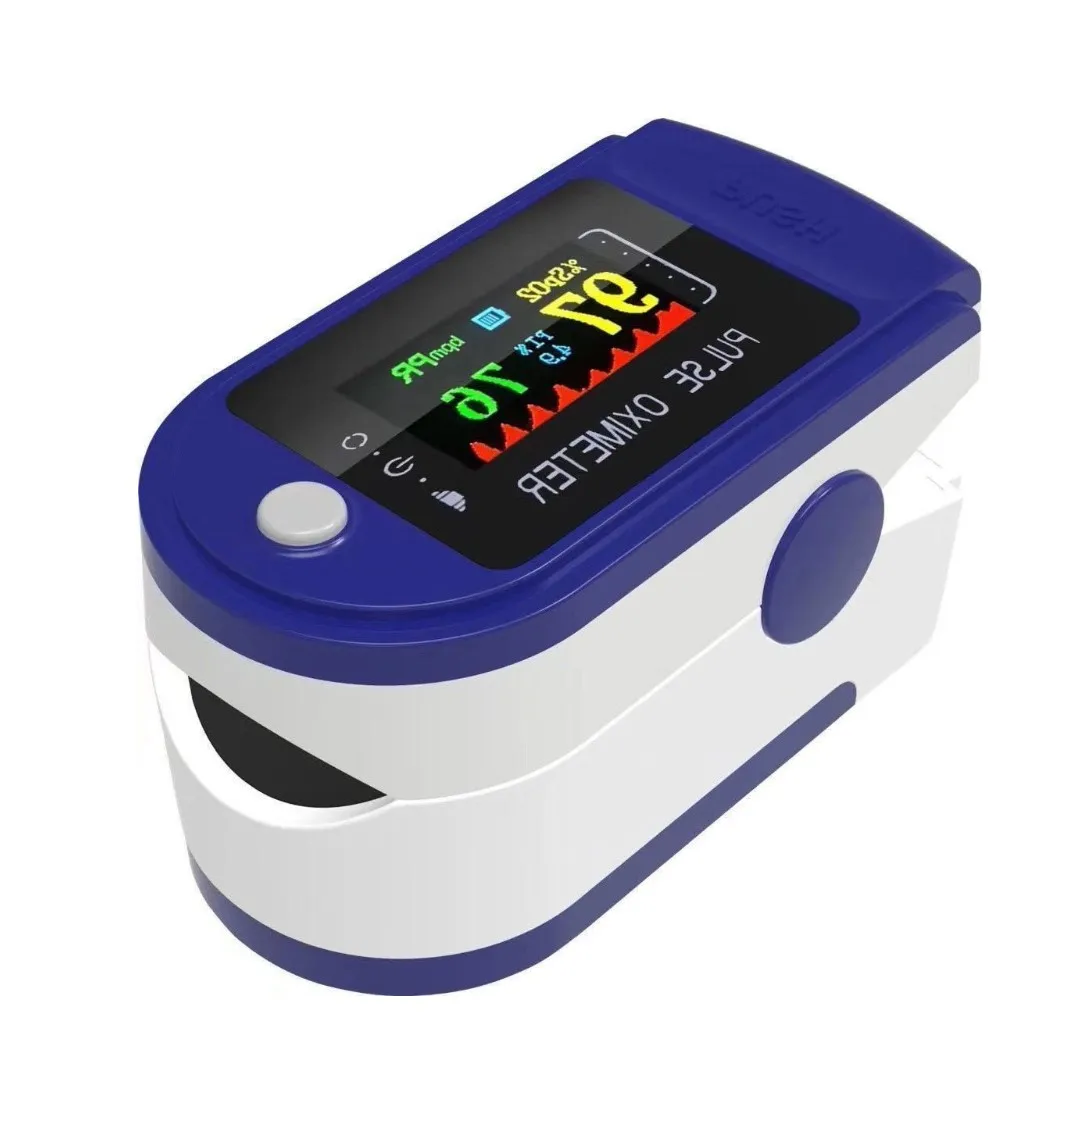 

Fingertip Oximeter Portable Compact Detects Heart Rate Pulse Sports Partner Oximetro пульсоксиметр Supports PayPal